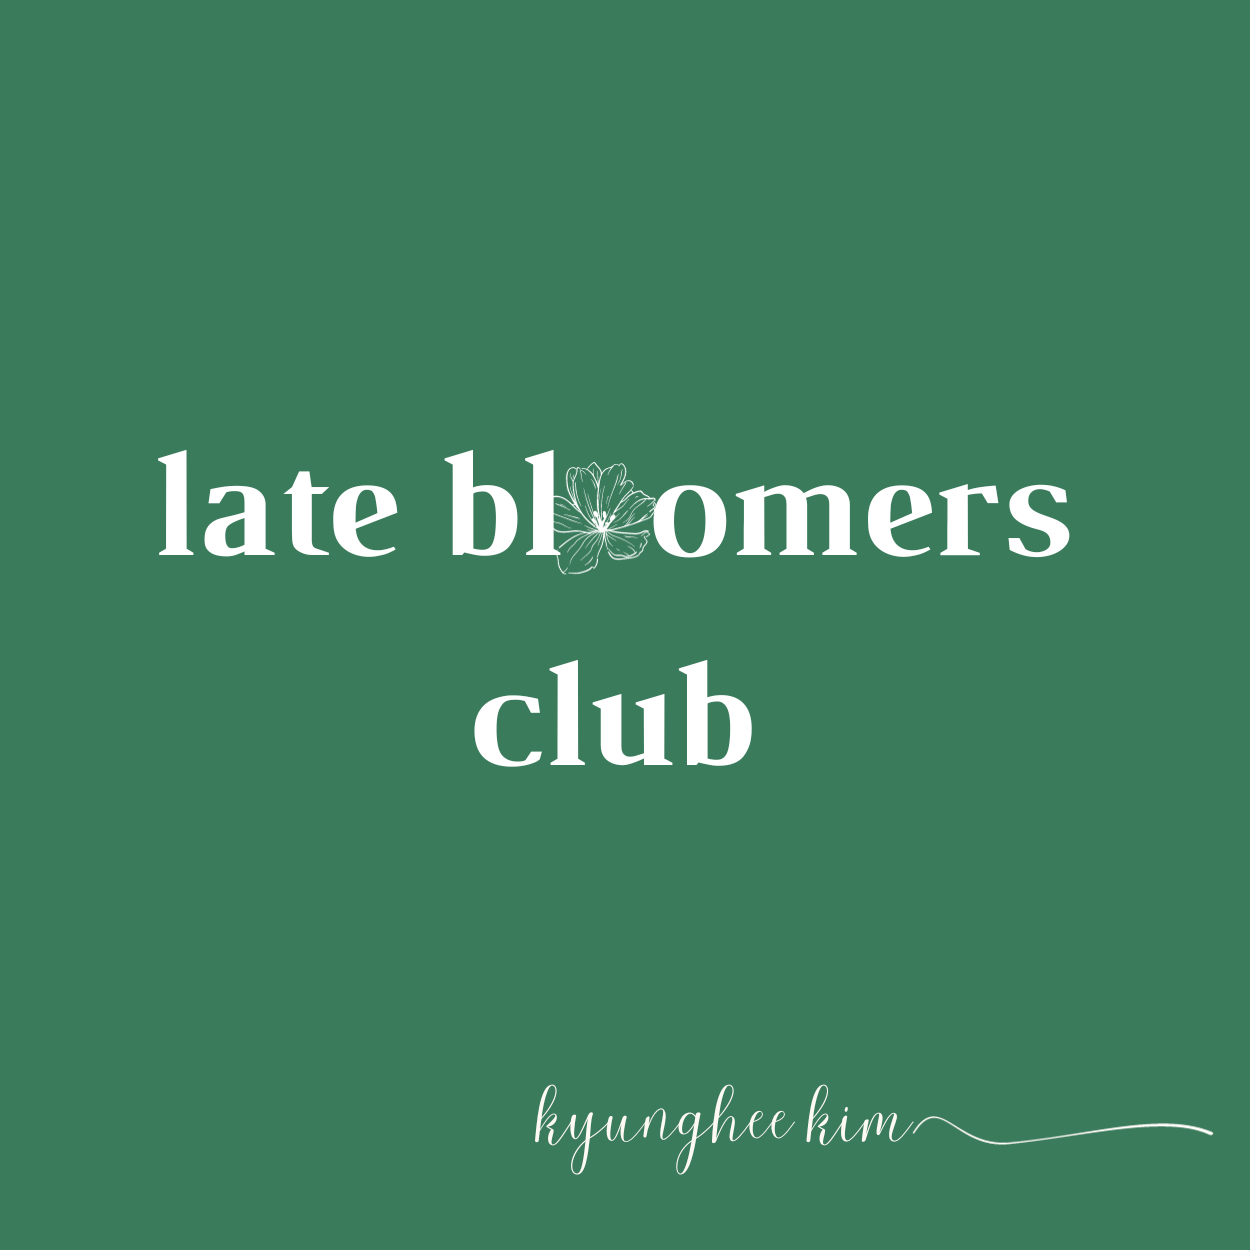 late bloomers club